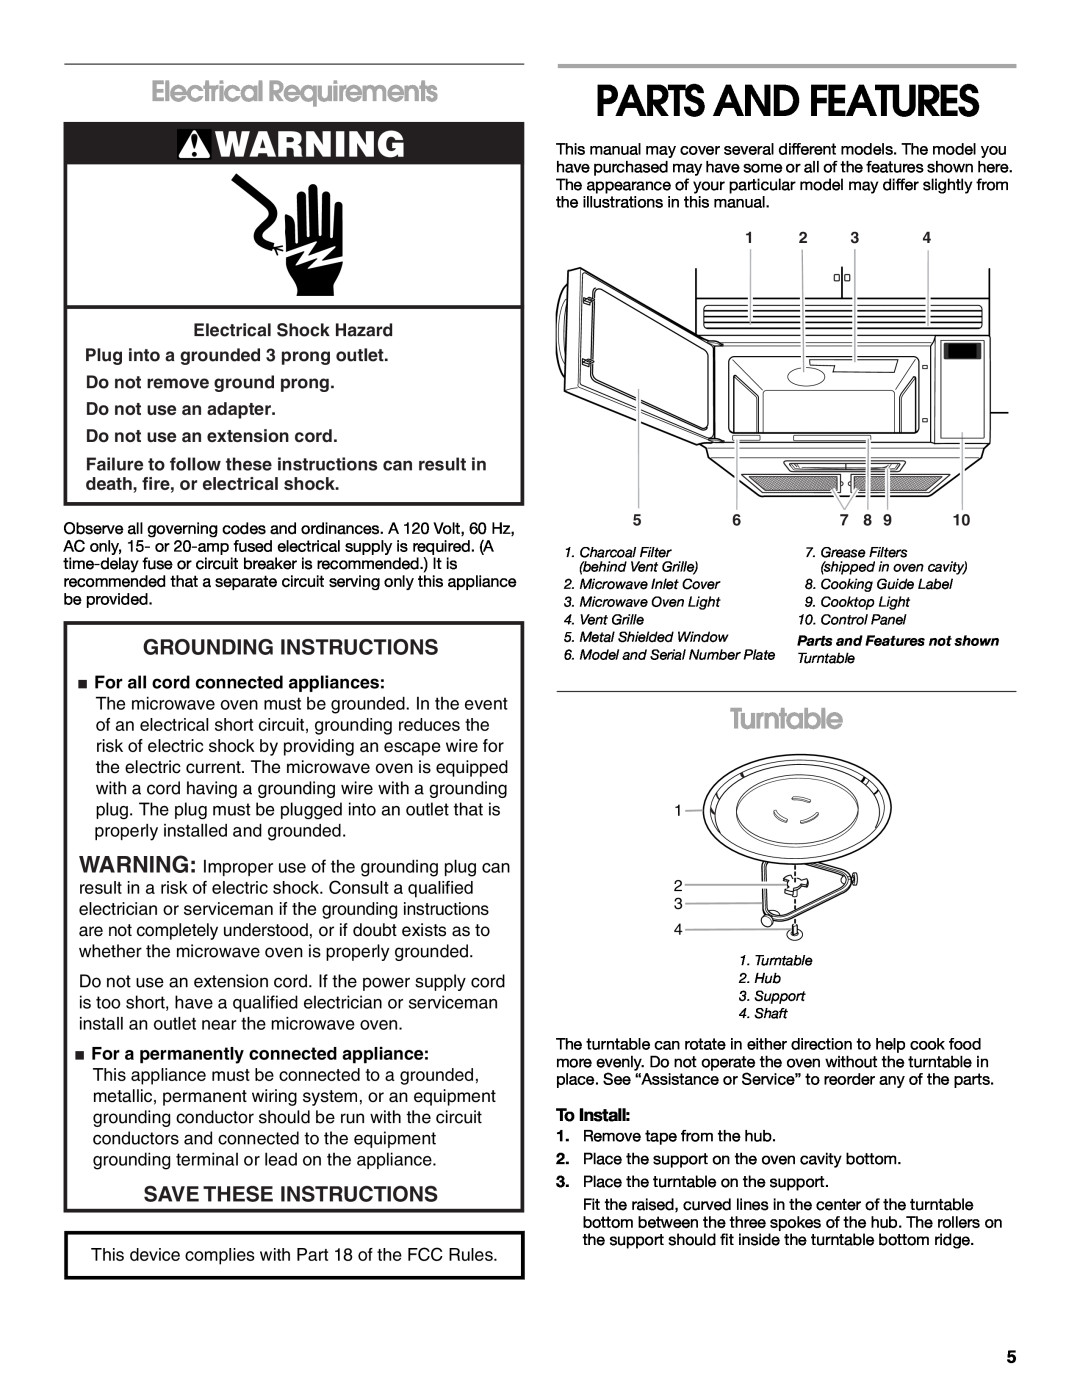 Whirlpool TMH14XM Parts And Features, Electrical Requirements, Turntable, Grounding Instructions, Save These Instructions 